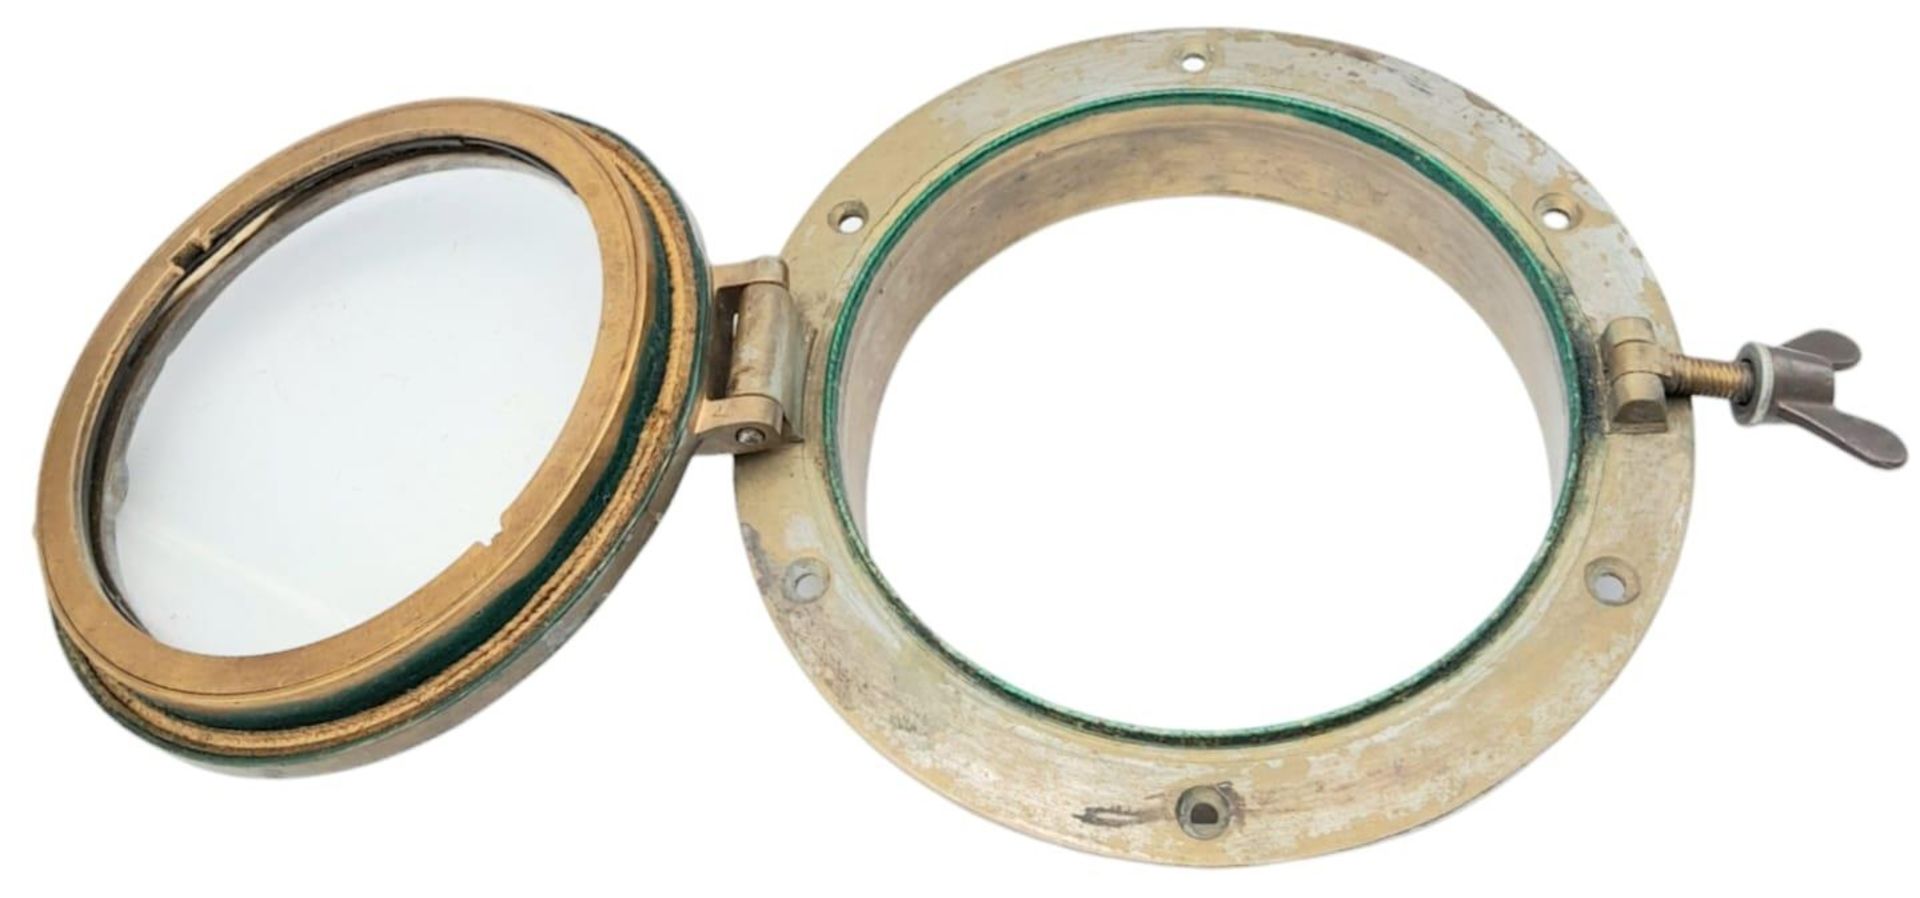 A WW2 German Kriegsmarine “Schnell Boot” Fast Boat Porthole. Commonly known as “E-Boats” by the - Image 2 of 6